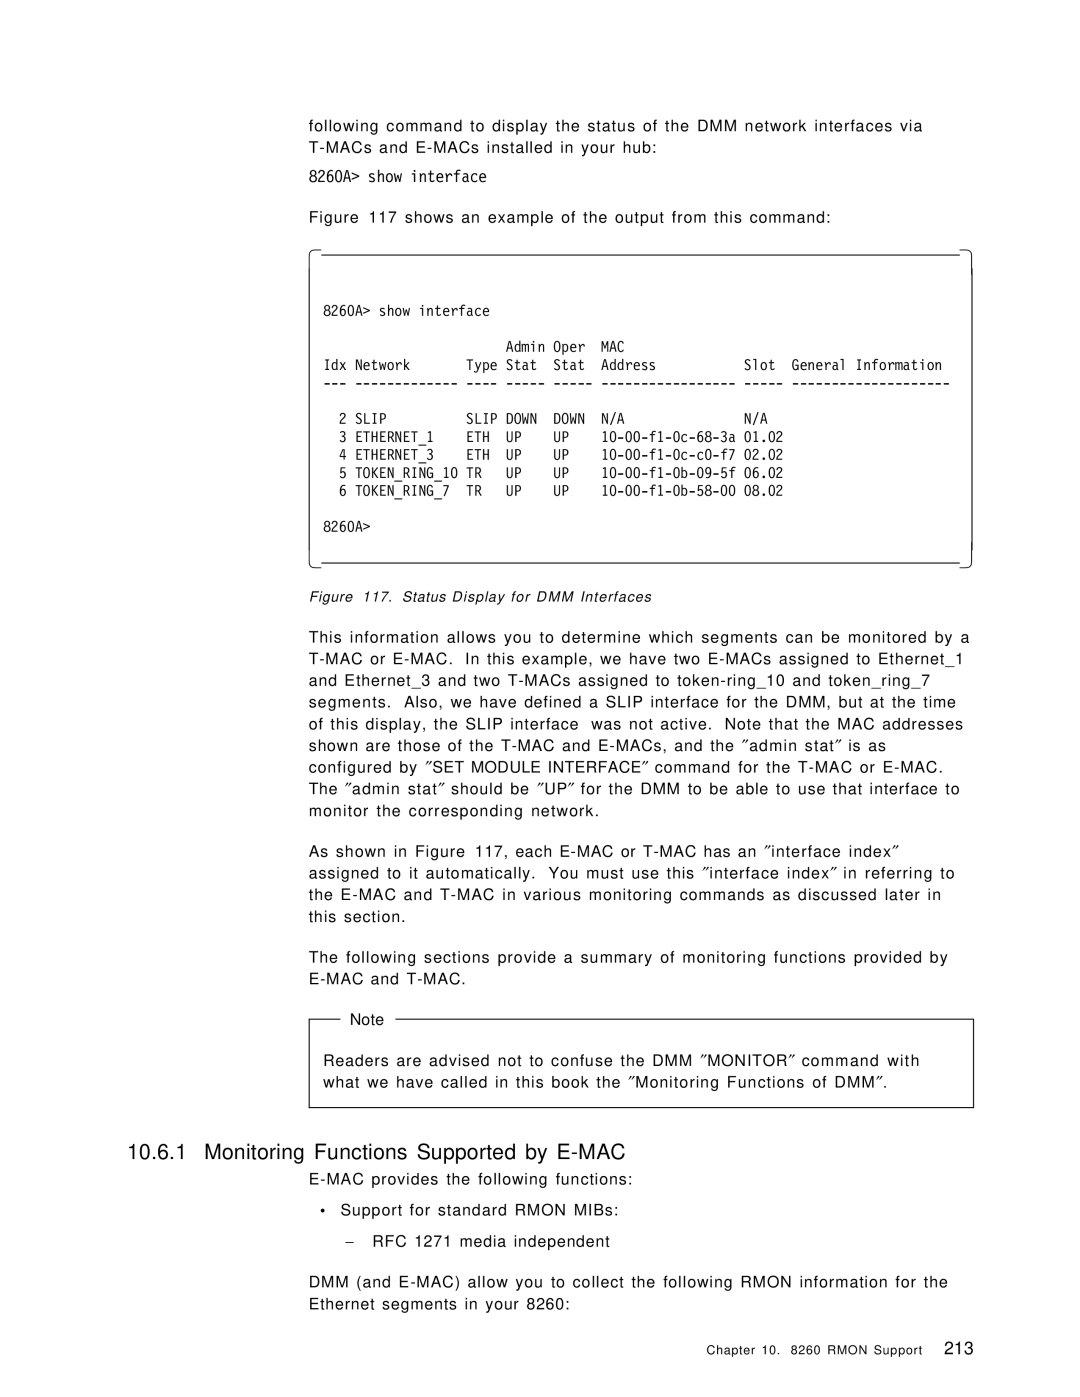 IBM manual Monitoring Functions Supported by E-MAC, 8260A show interface 